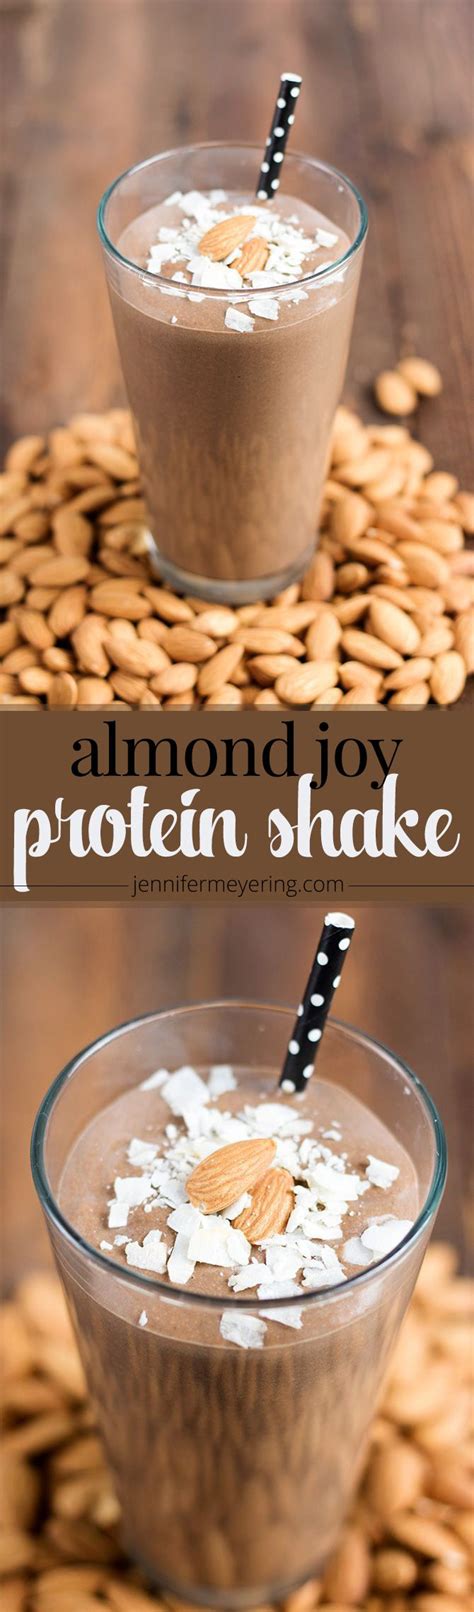 Let almonds, cocoa, and green tea, wake you up in the morning. Almond Joy Protein Shake - JenniferMeyering.com | Fitness ...